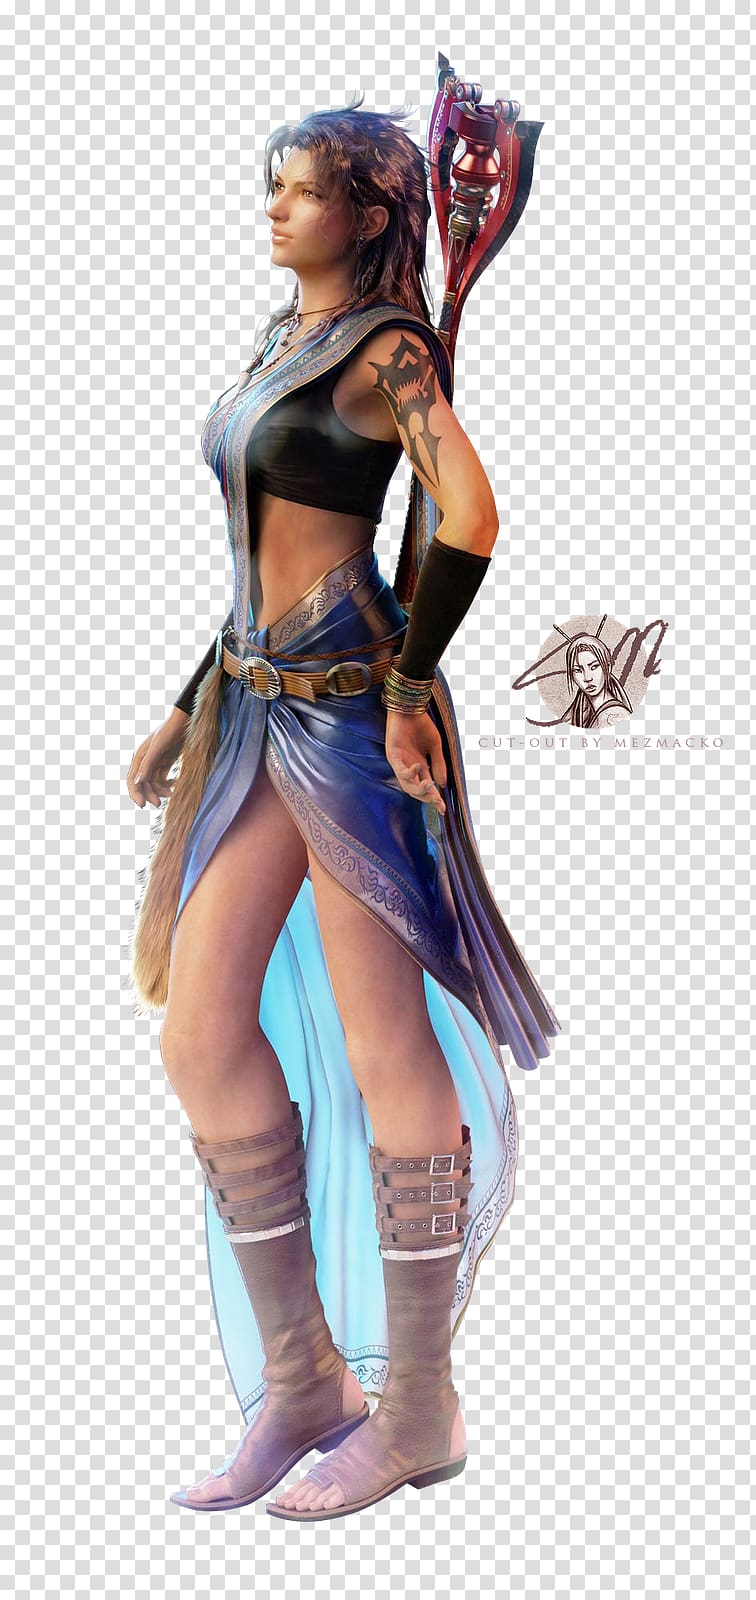 Final Fantasy XIII Lineage II Lightning Oerba Yun Fang Sprite, Final Fantasy transparent background PNG clipart